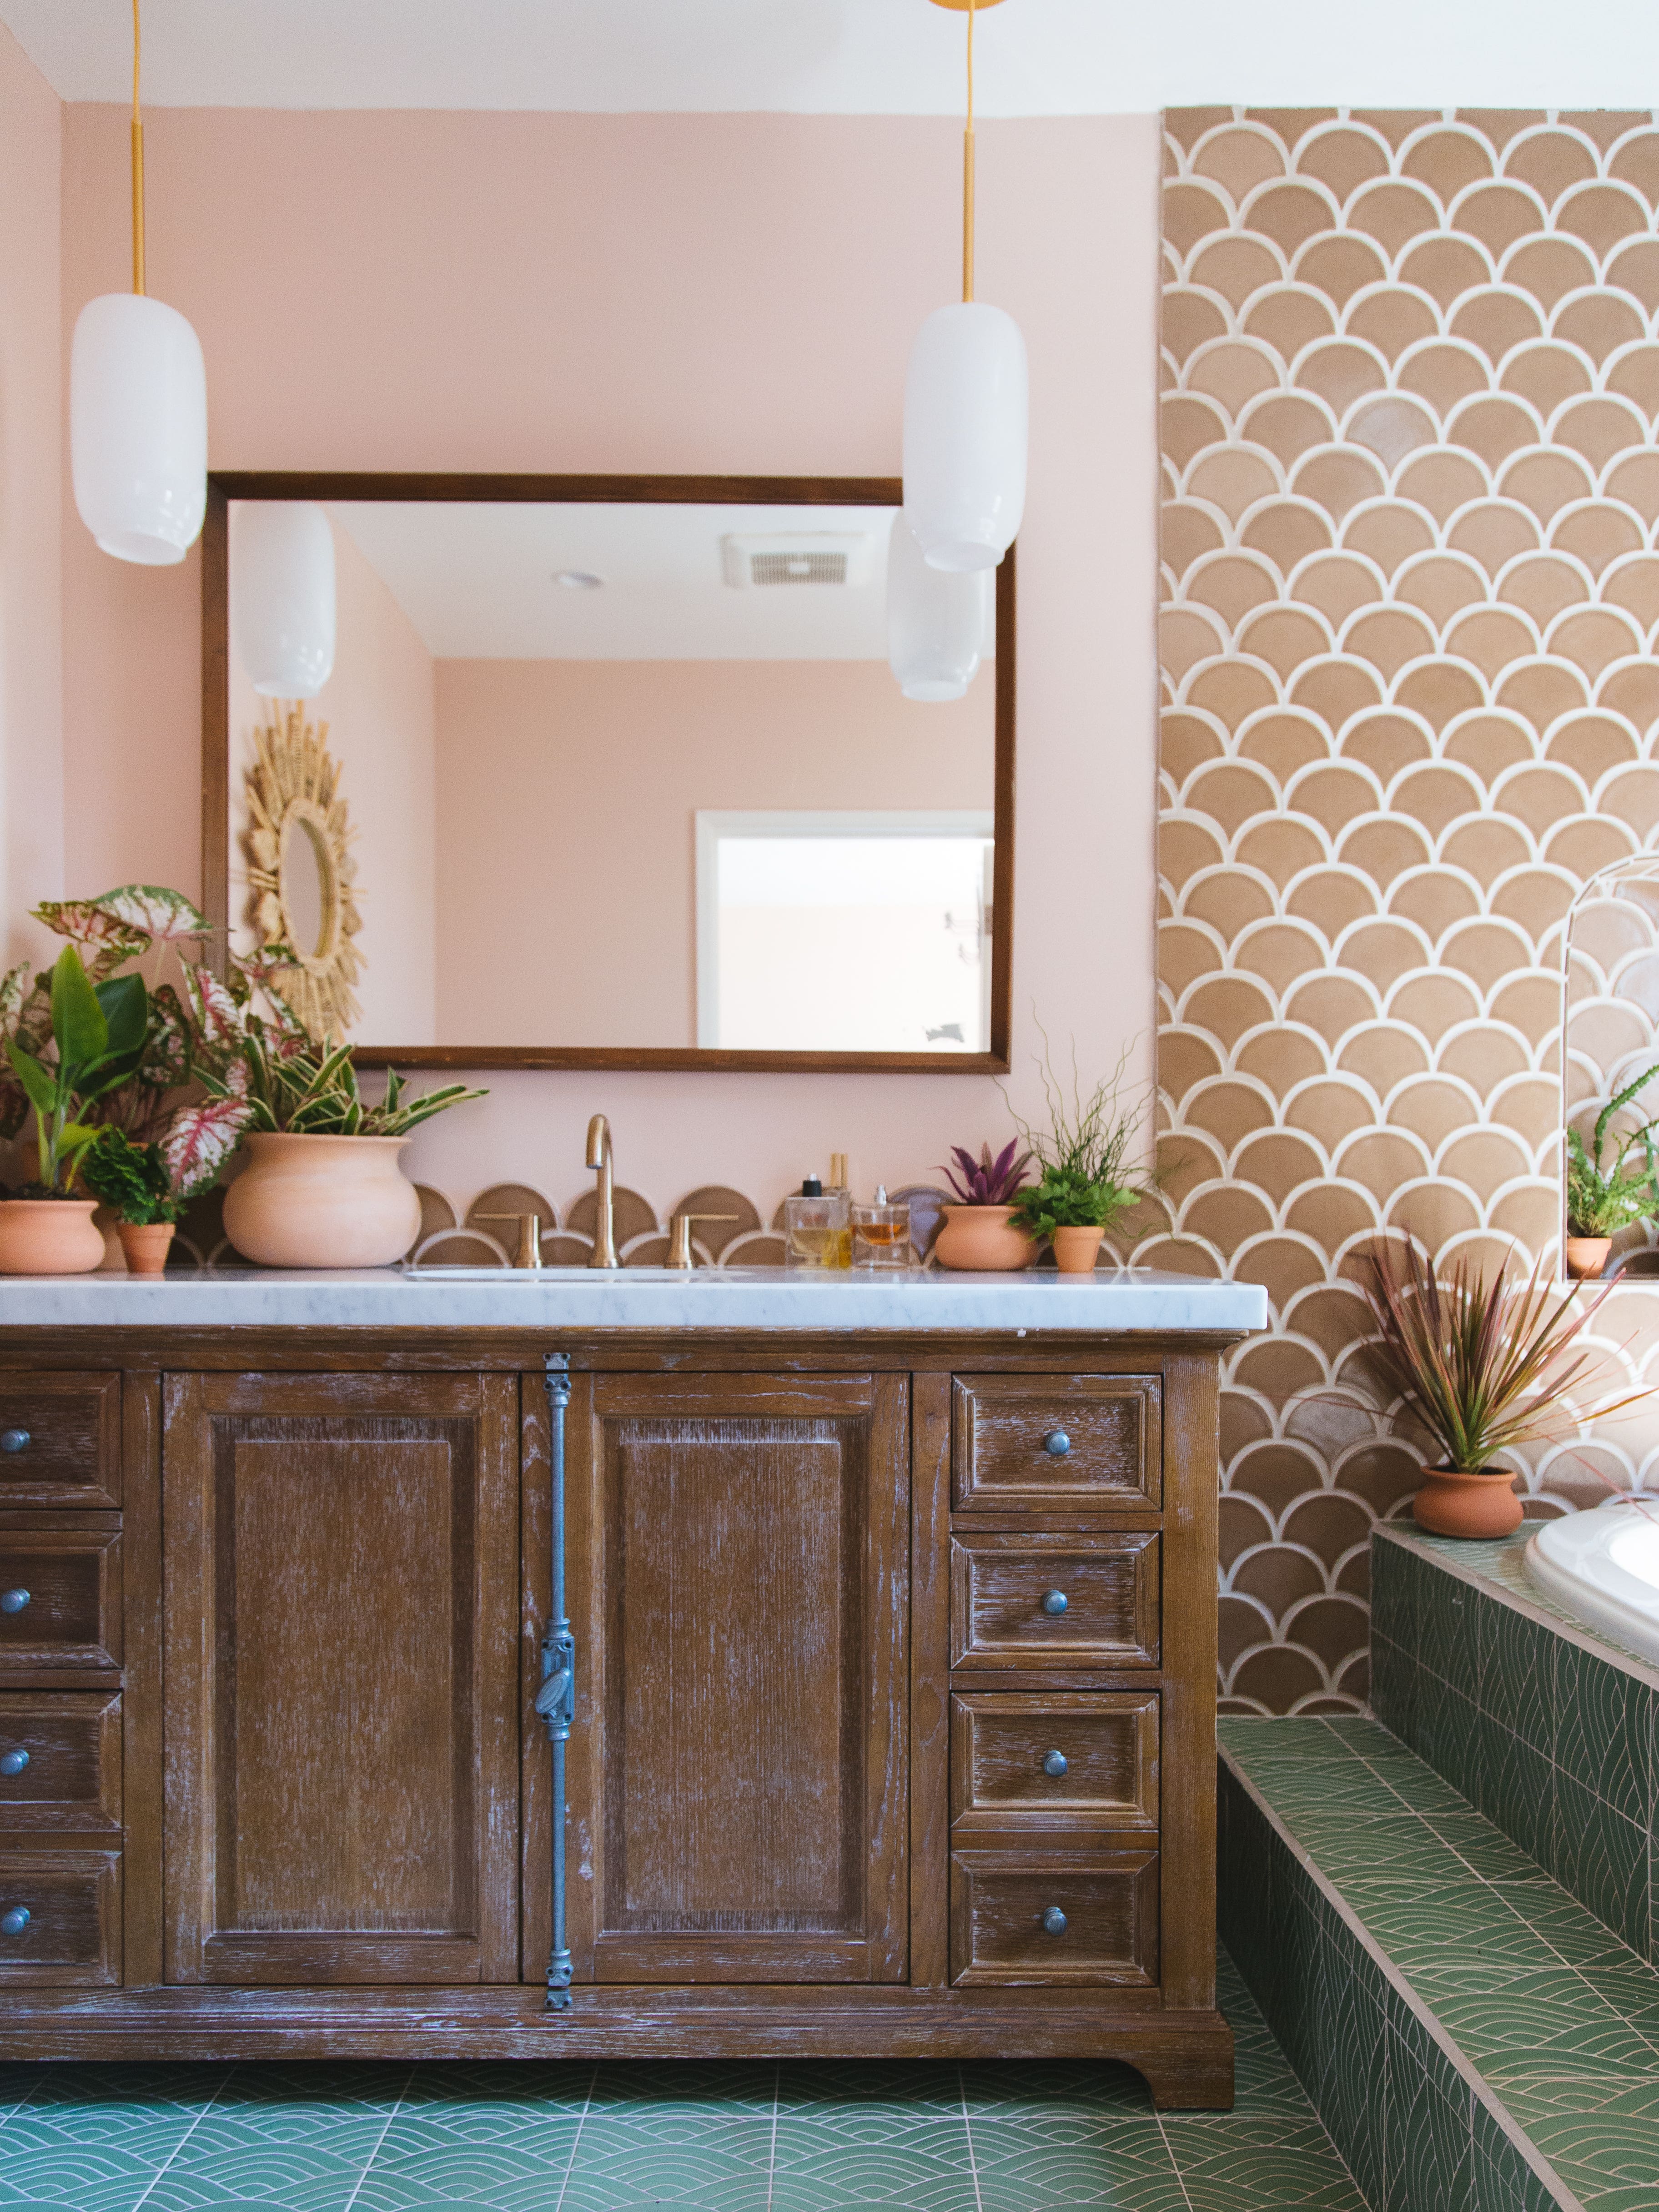 Before & After: Justina Blakeney Gives a Dated Bathroom a Boho Makeover